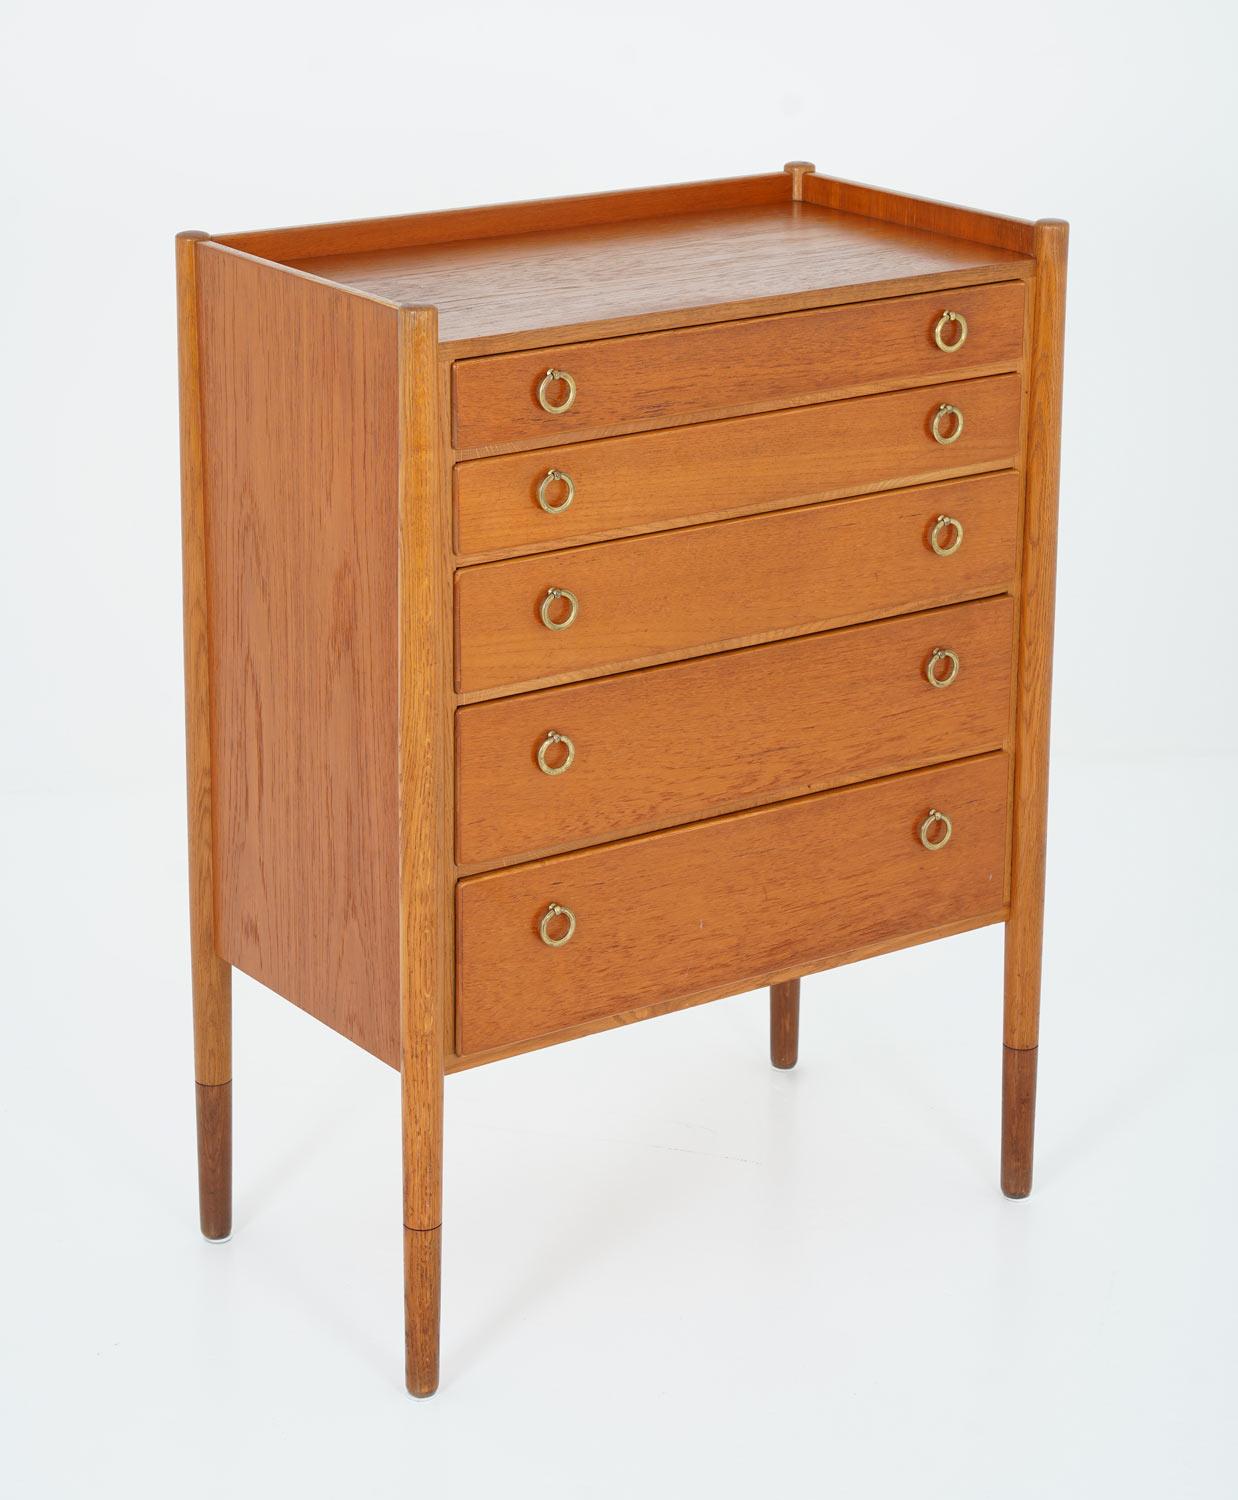 Beautiful chest of drawers, manufactured in Sweden, circa 1950.
This bureau is made of oak and teak veneer. It consists of five drawers of different sizes with beautiful brass handles.

Condition: Very good original condition with signs of age and